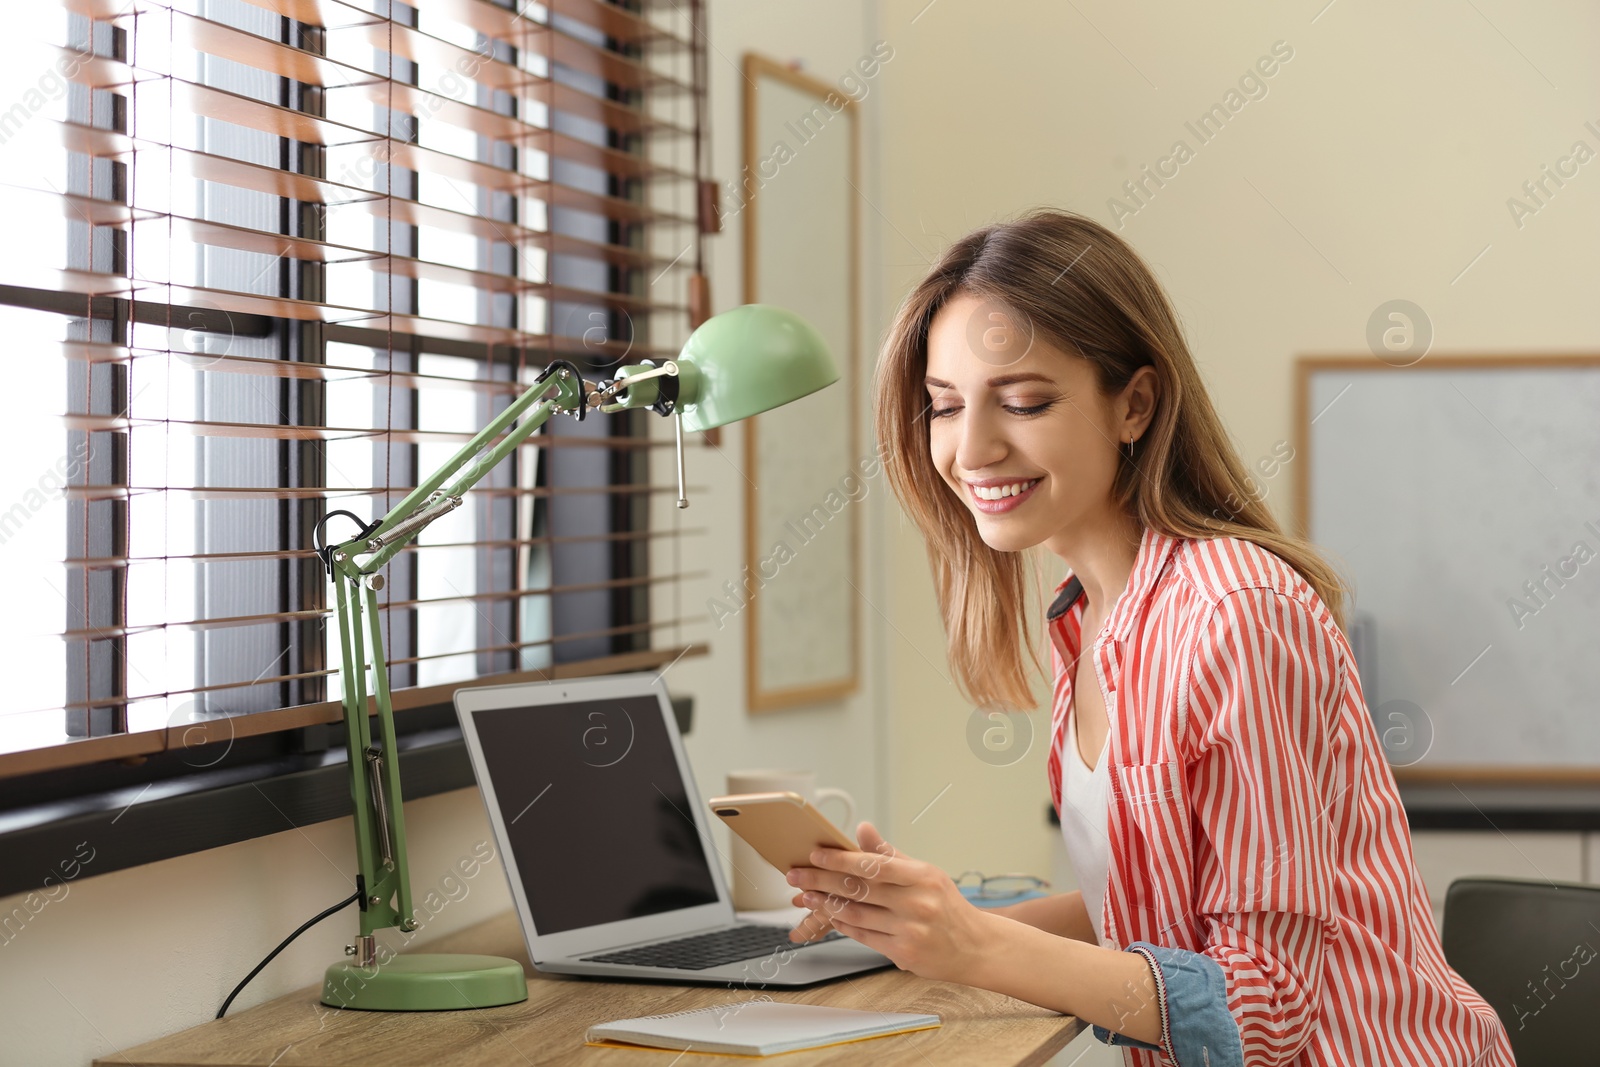 Image of Young woman using phone and laptop at home